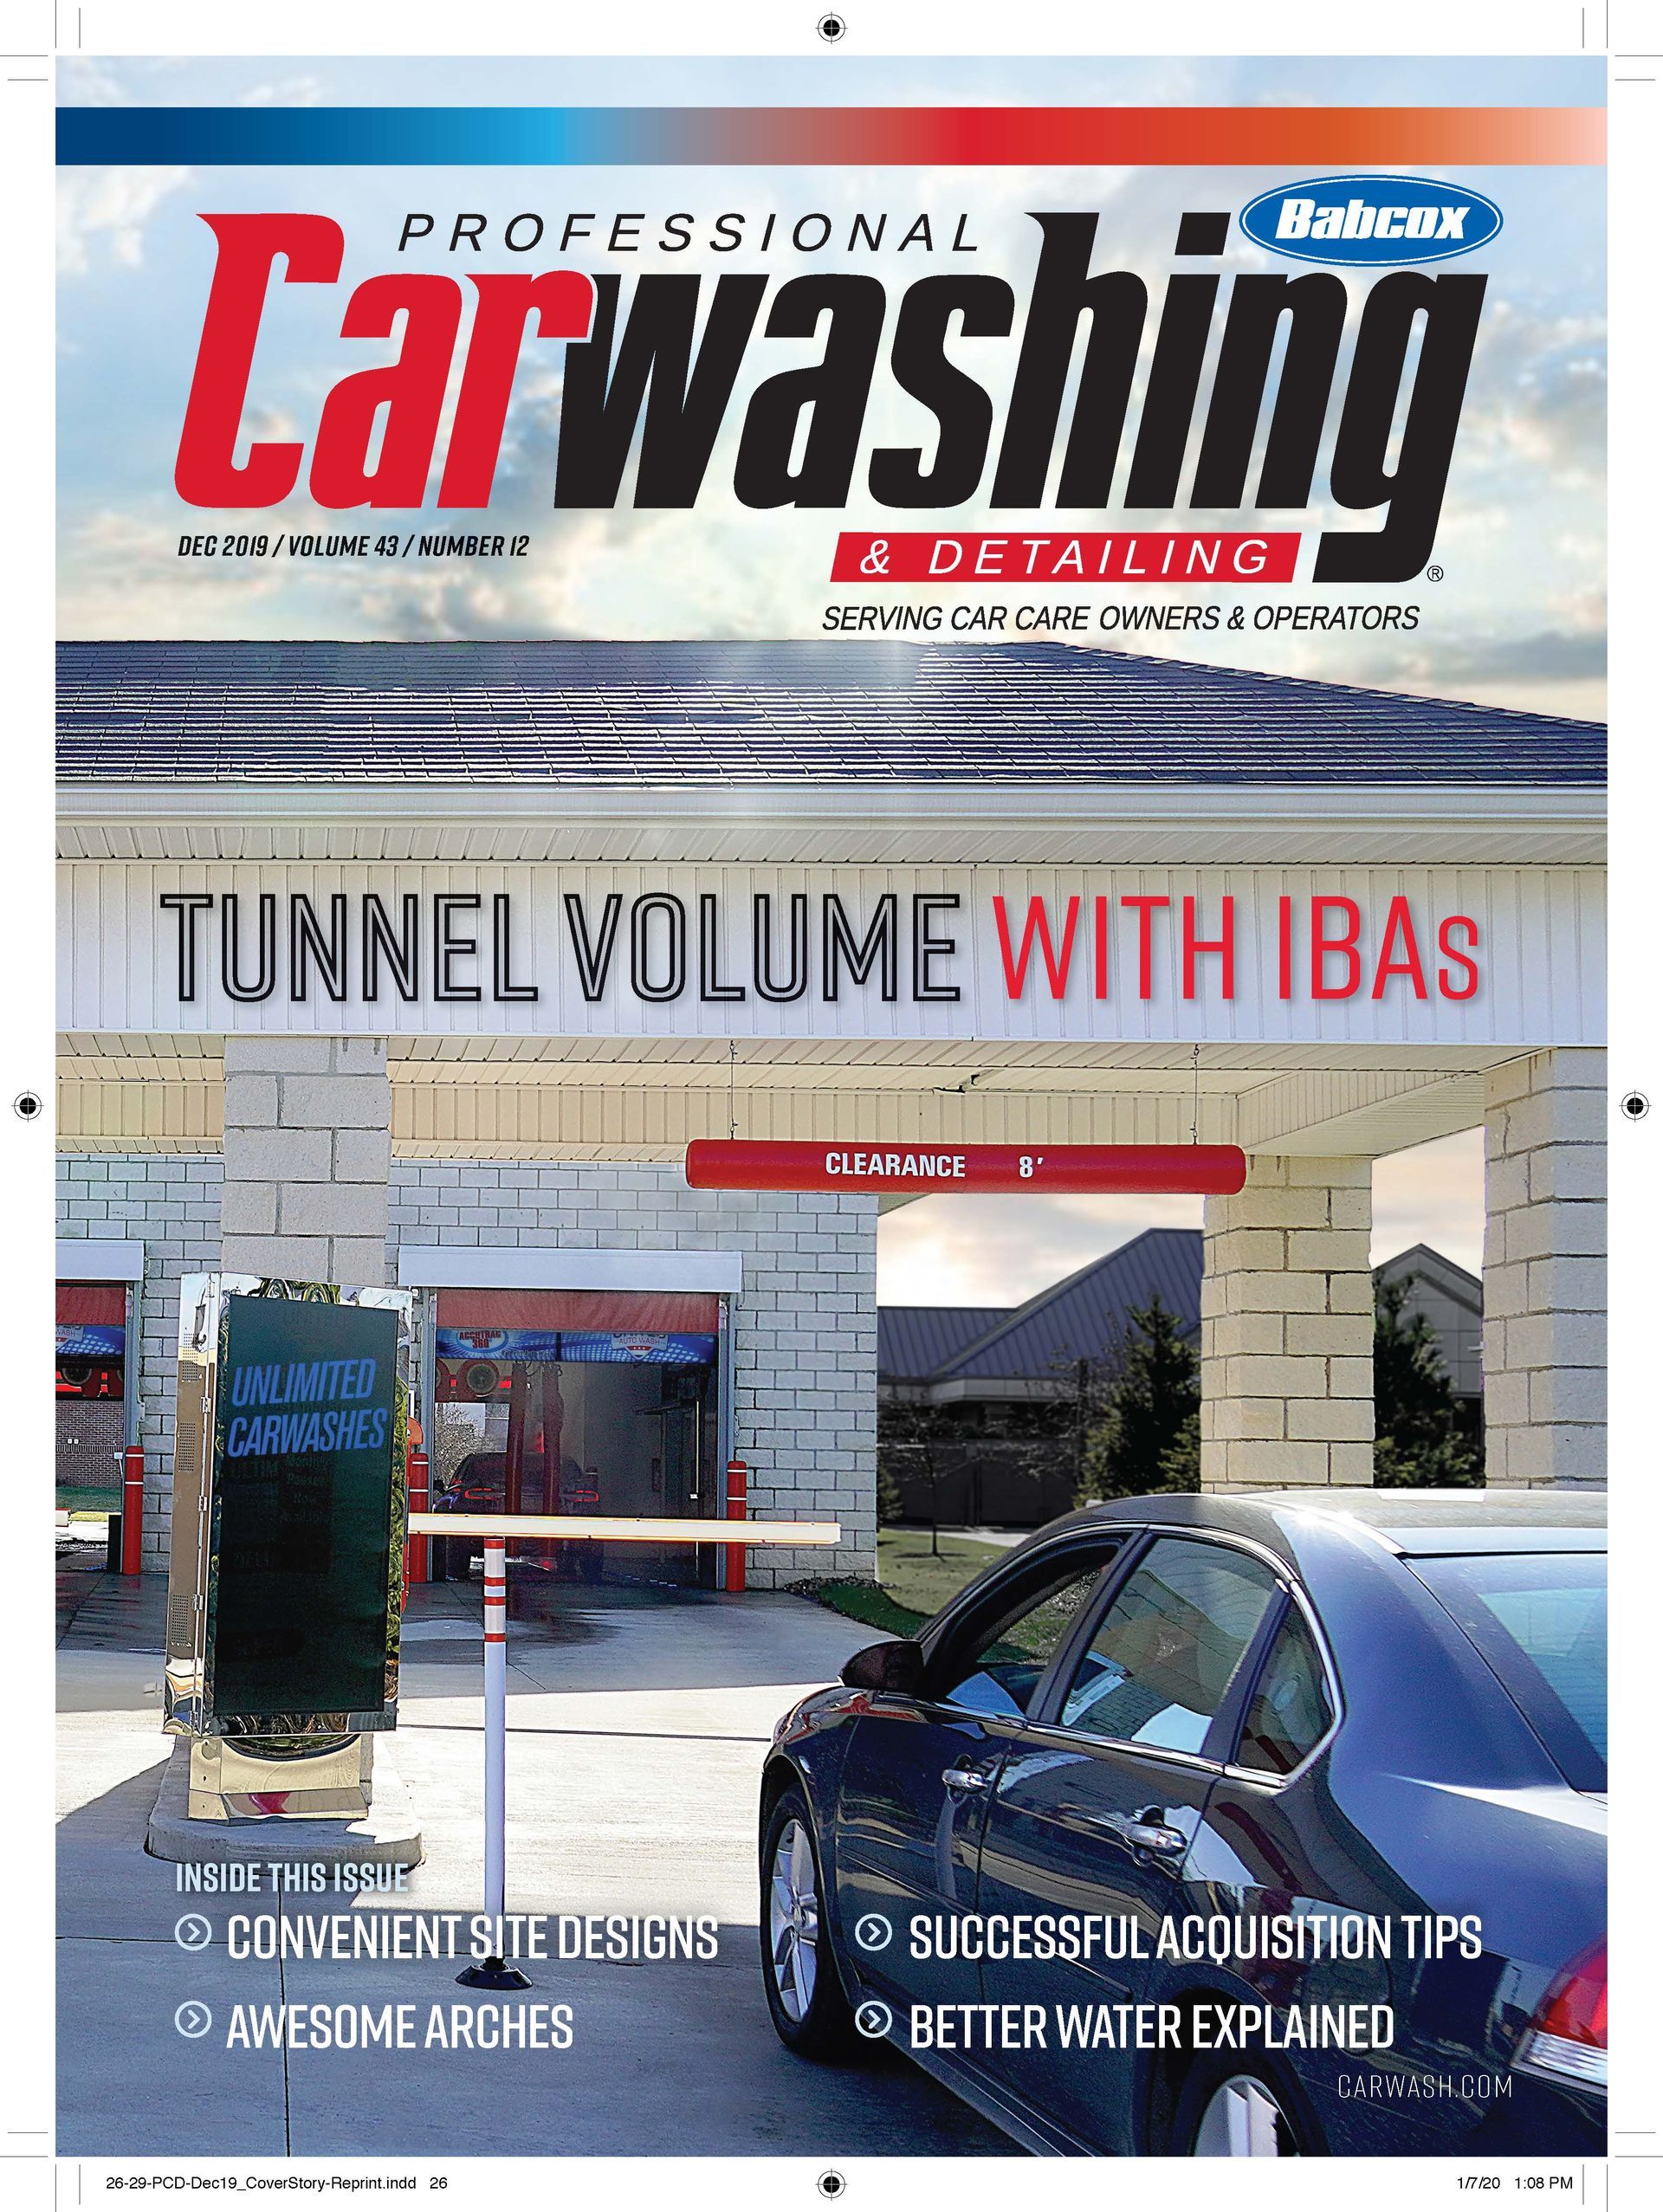 The cover of a car washing magazine shows a car being washed at a car wash.